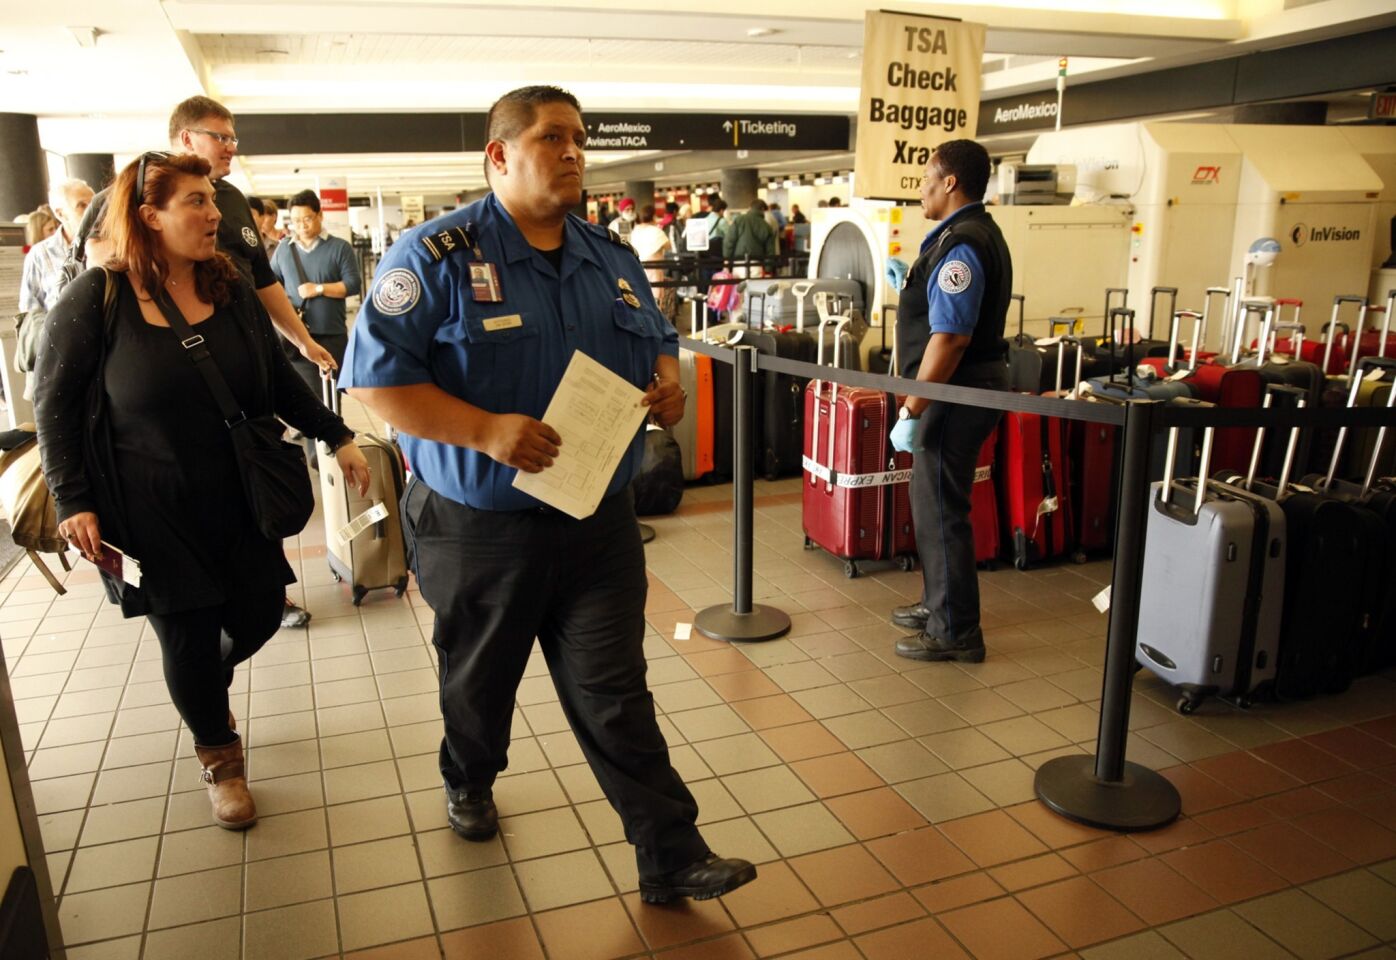 Transportation Security Administration agents help travelers with their luggage. Suspect Paul Anthony Ciancia's family family notified Los Angeles police Friday morning after receiving text messages from the 23-year-old that made them concerned about his well-being.